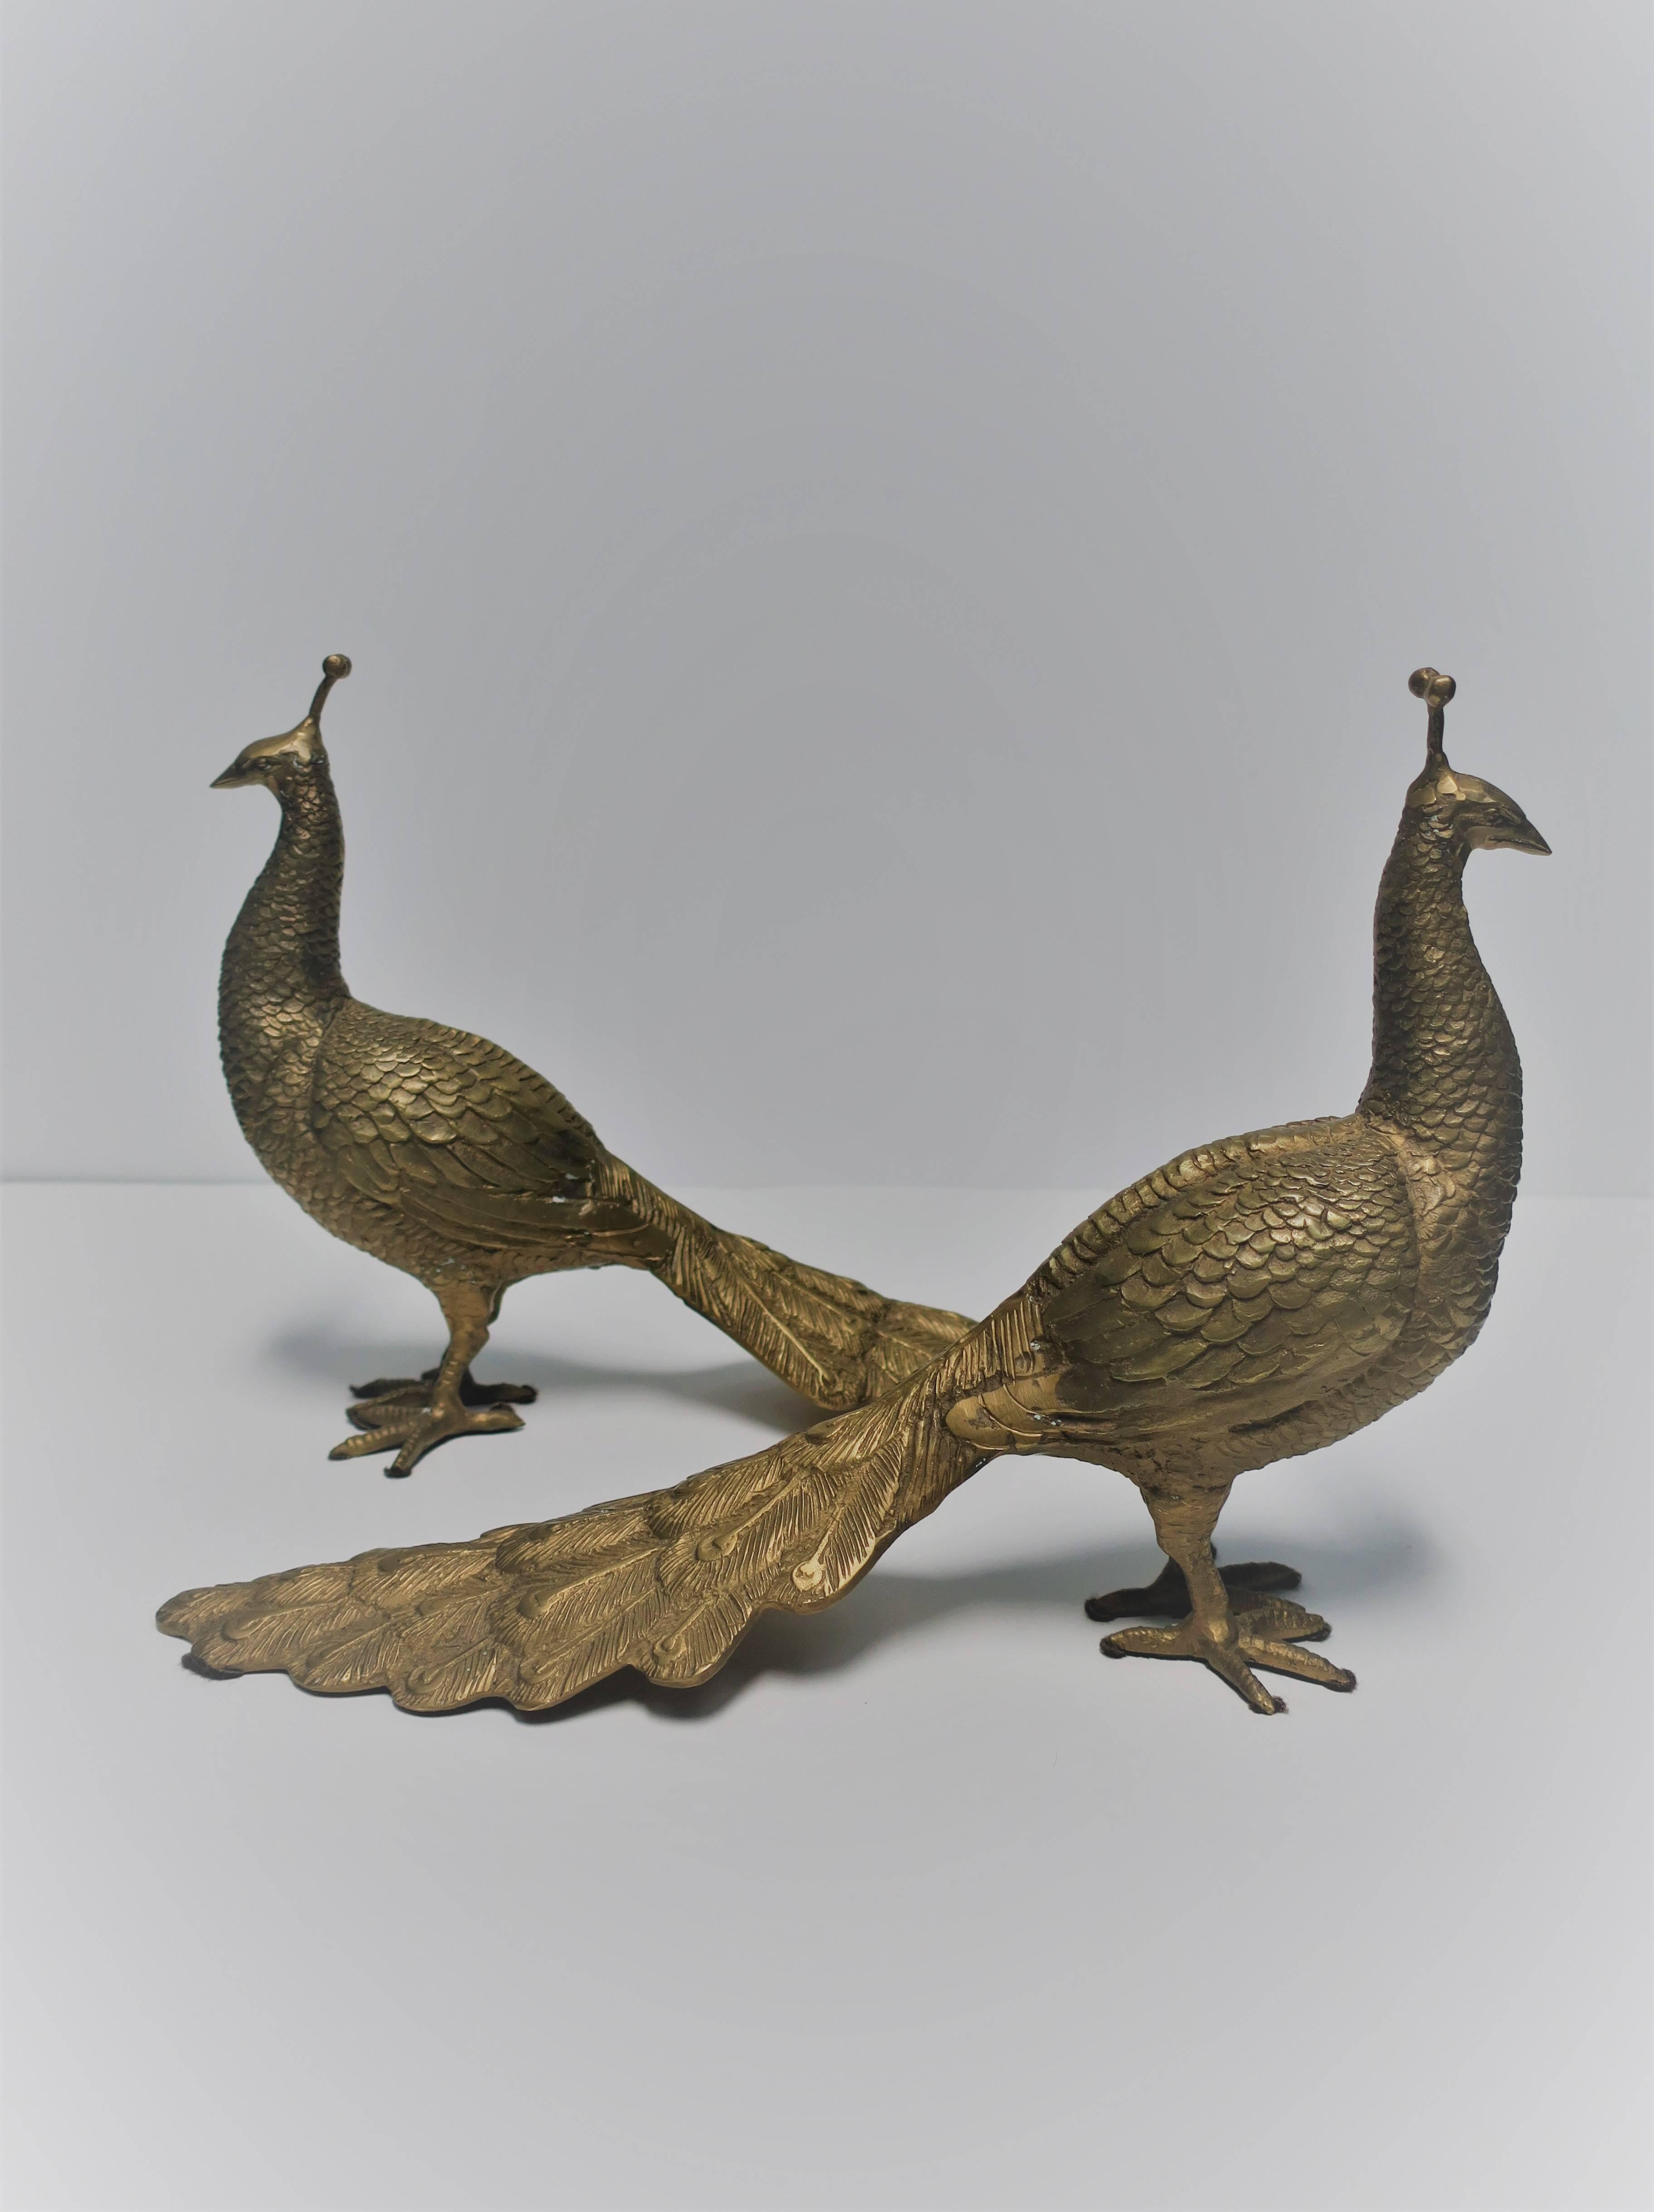 A beautiful and substantial pair of vintage brass Peacock bird sculptures, circa 1960s. Birds measure 10 1/2 inches high, and almost 16 inches long. Pair available here online. By request, pair can be made available by appointment to the trade in